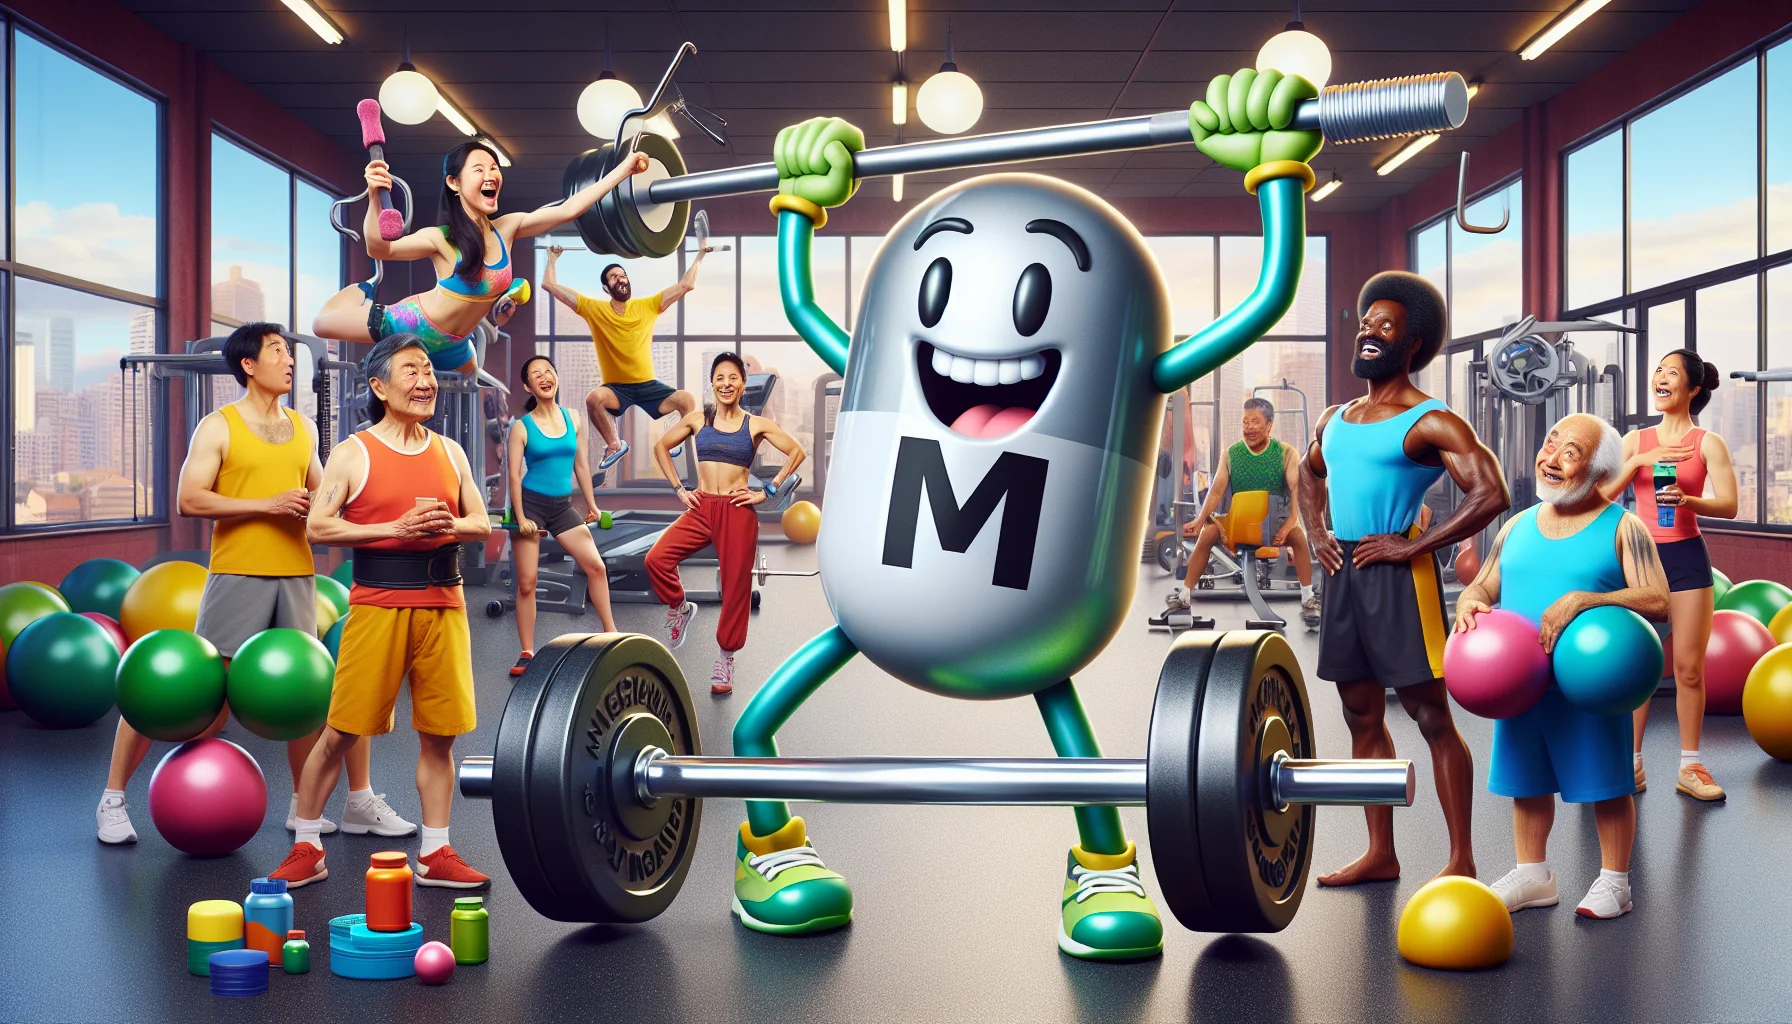 Create an image that depicts a humorous scene featuring trace mineral, magnesium. The story takes place in a lively, bustling gym. At the center, a magnified representation of a magnesium molecule, animated with arms and legs, is in full sports gear wrestling a barbell with a cheeky grin. Meanwhile, a diverse group of gym-goers composed of a South Asian female fitness instructor, a Caucasian elderly man doing yoga, a Black fit gentleman actively lifting weights, a Middle-Eastern woman jogging on a treadmill, and a Hispanic male gymnast practicing on the parallel bars, stare in astonishment or laugh playfully, a few holding brightly colored sports supplement bottles with a magnified magnesium symbol on the label. The setting should be vibrant, the expressions should be exaggerated for humor and magnesium should be the key attraction, showcasing its importance in sports supplementation.